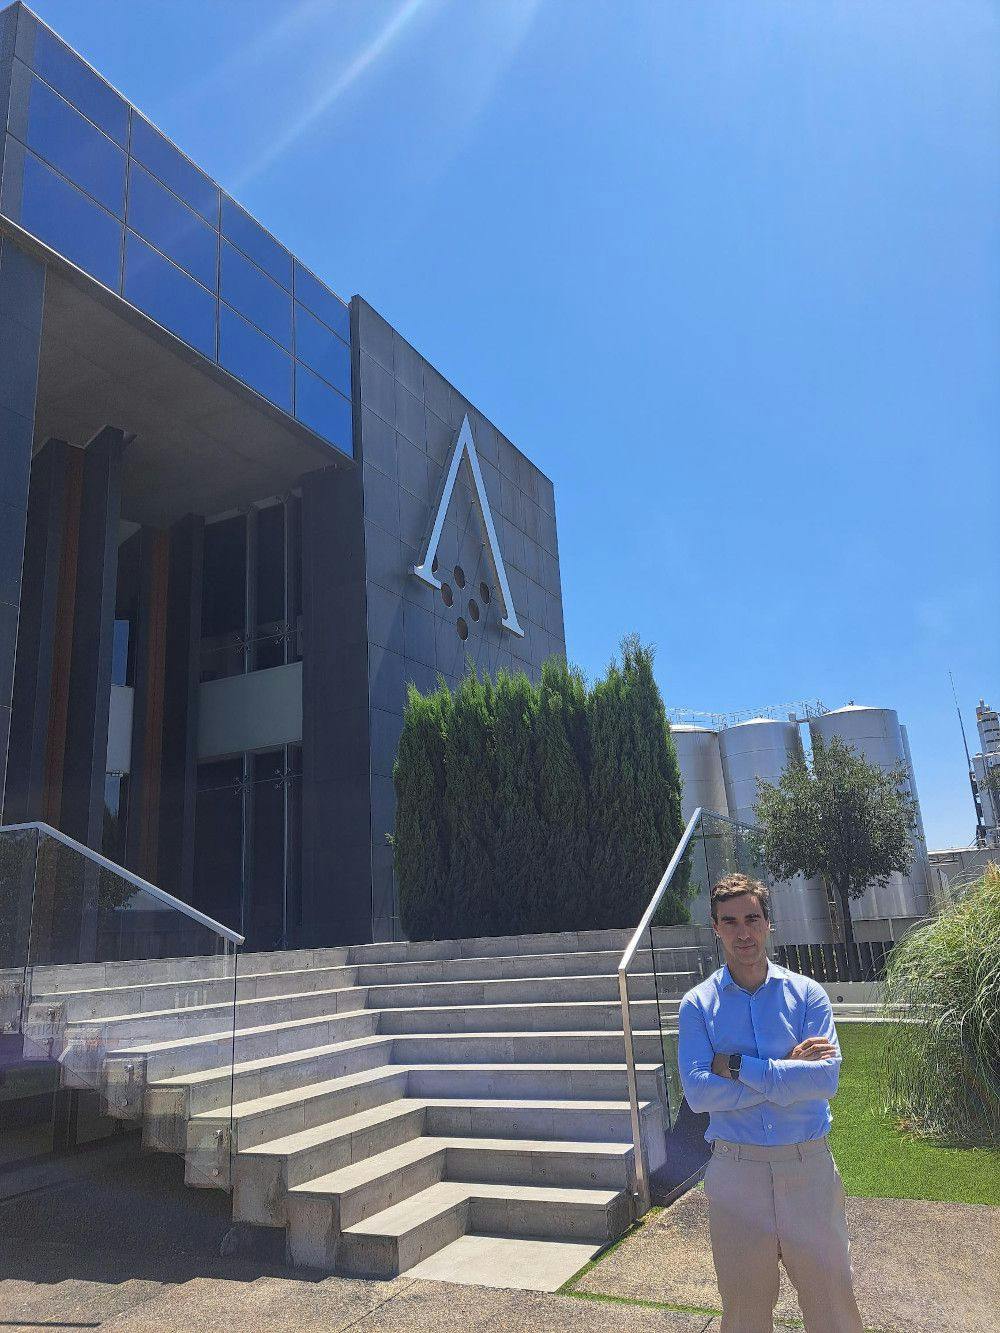 Pictured: Alvinesa Natural Ingredients’ new CEO Jon Fernández De Barrena. Photo from Alvinesa Natural Ingredients